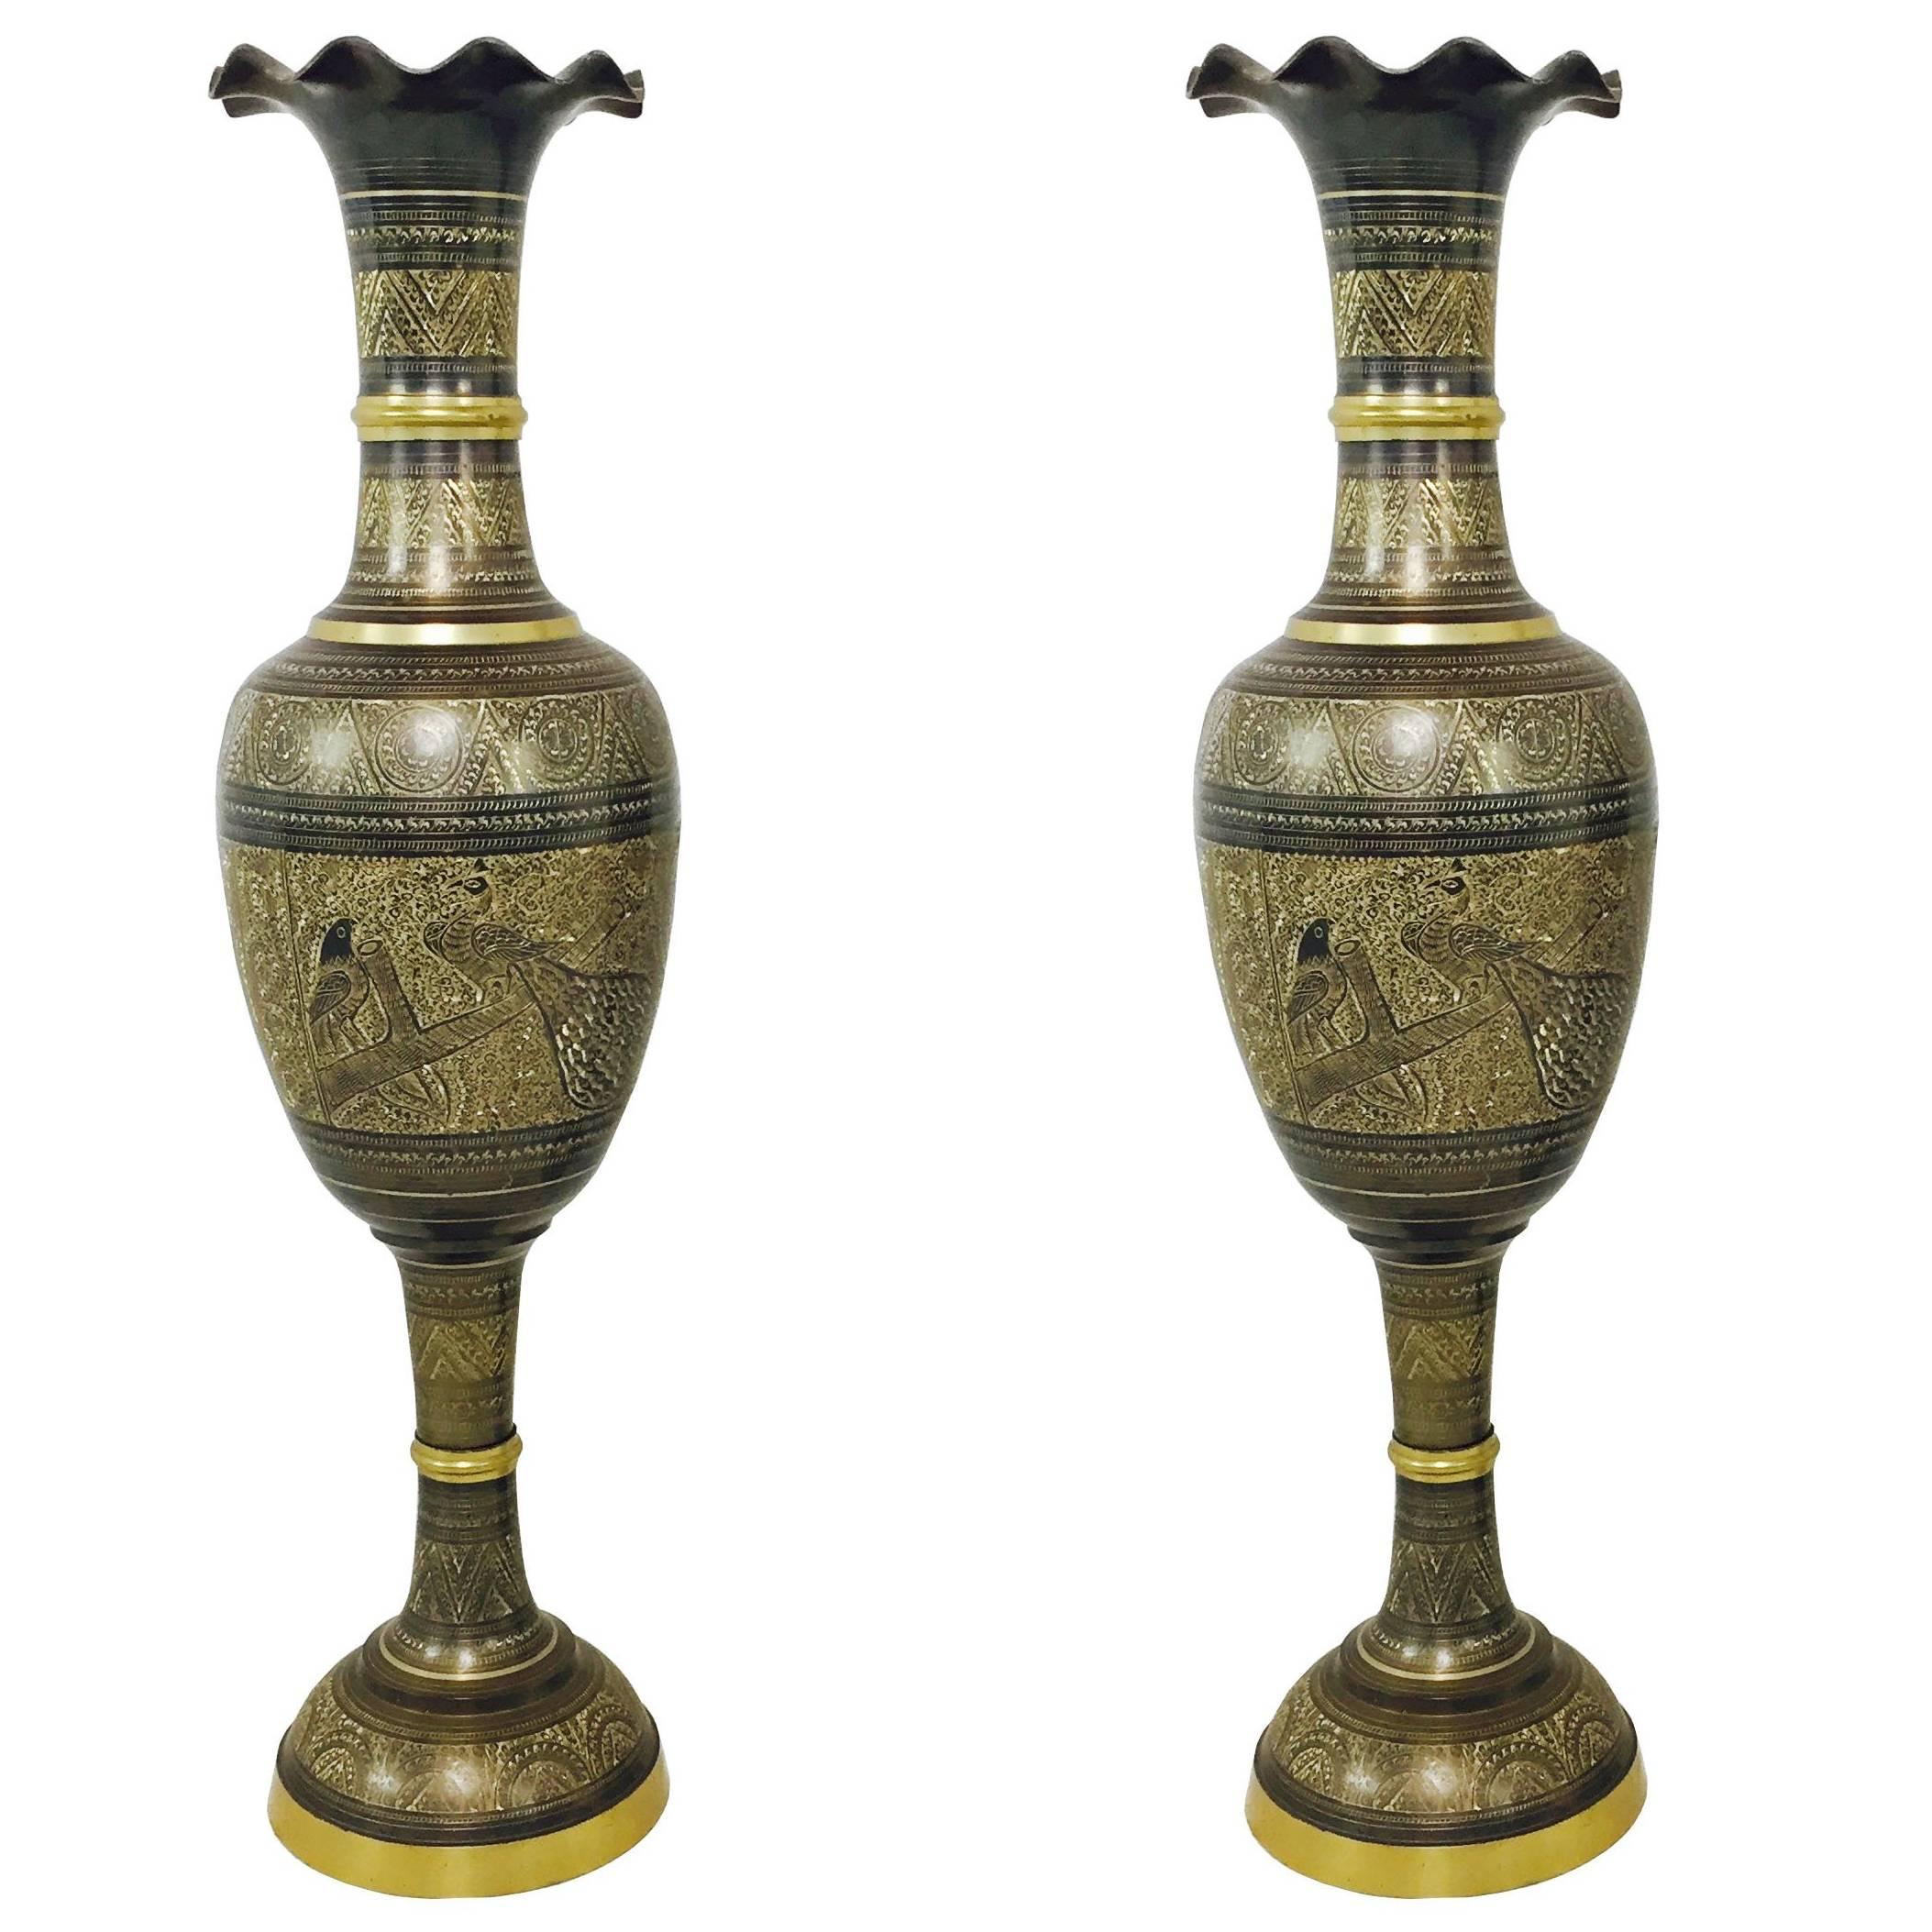 Pair of Tall Brass Etched Afghan Vases